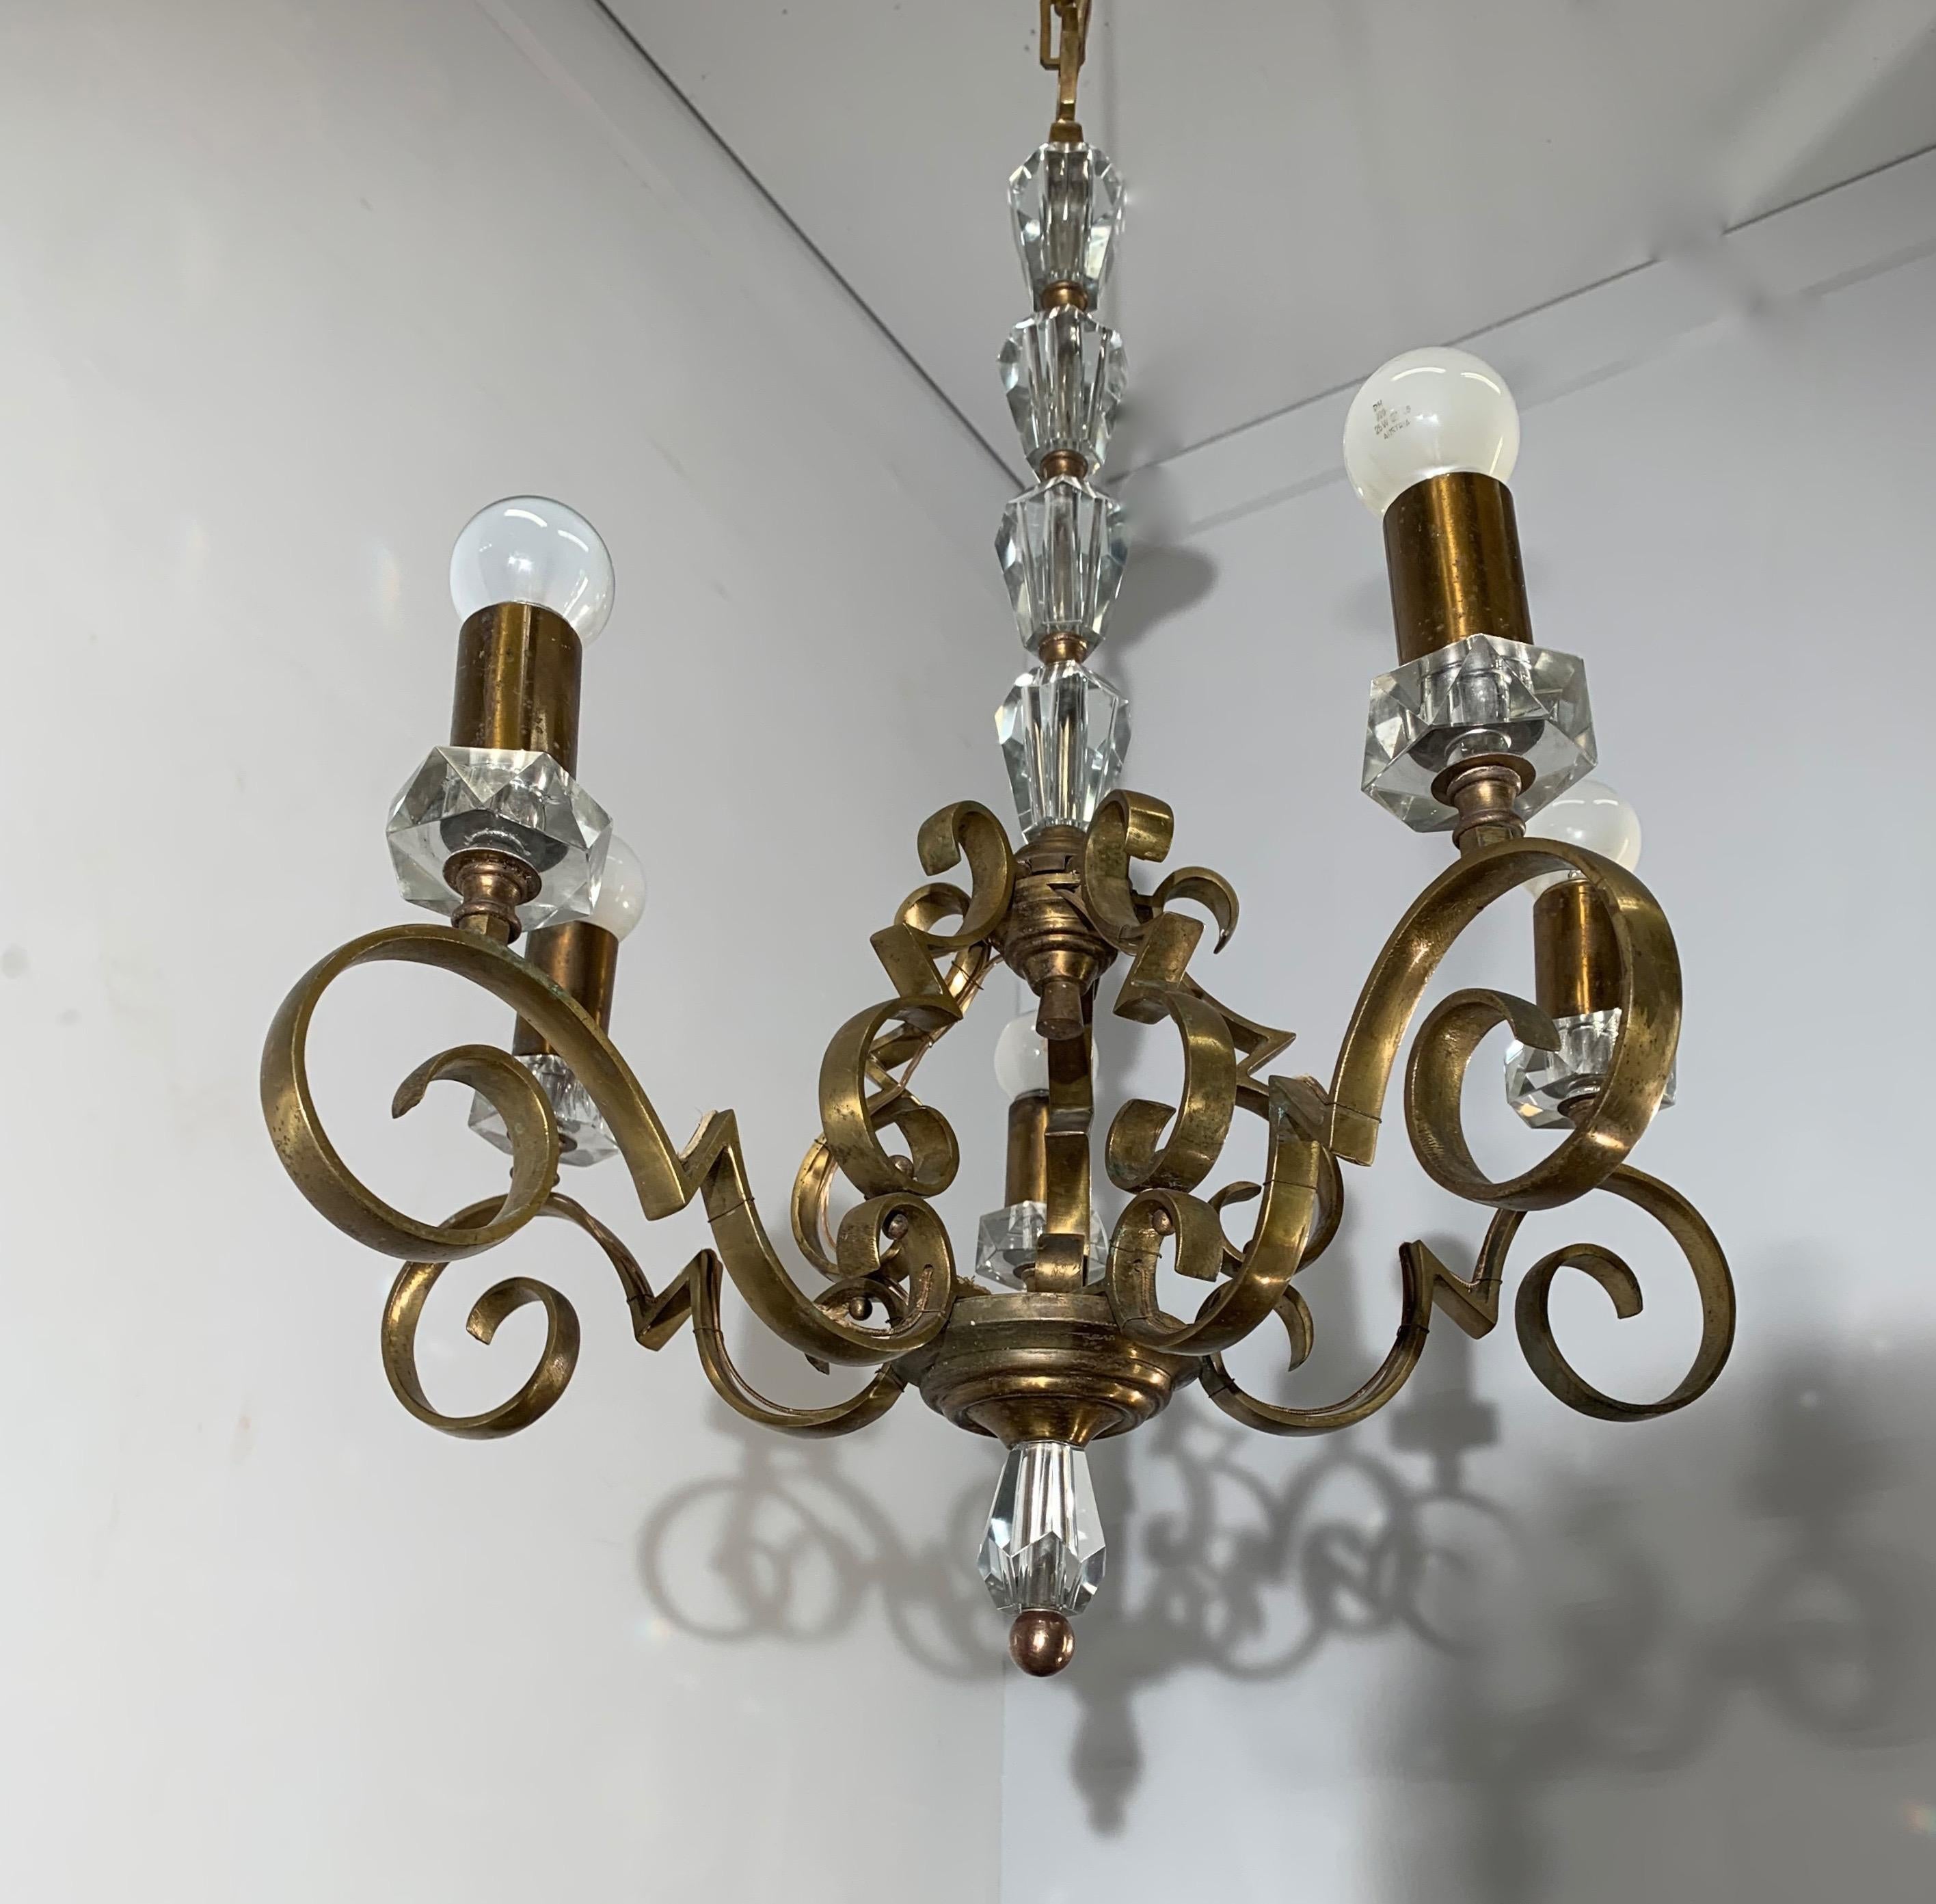 Hand-Crafted Rare and Handcrafted Jule Leleu Style 5 Light Bronze & Glass Art Deco Chandelier For Sale